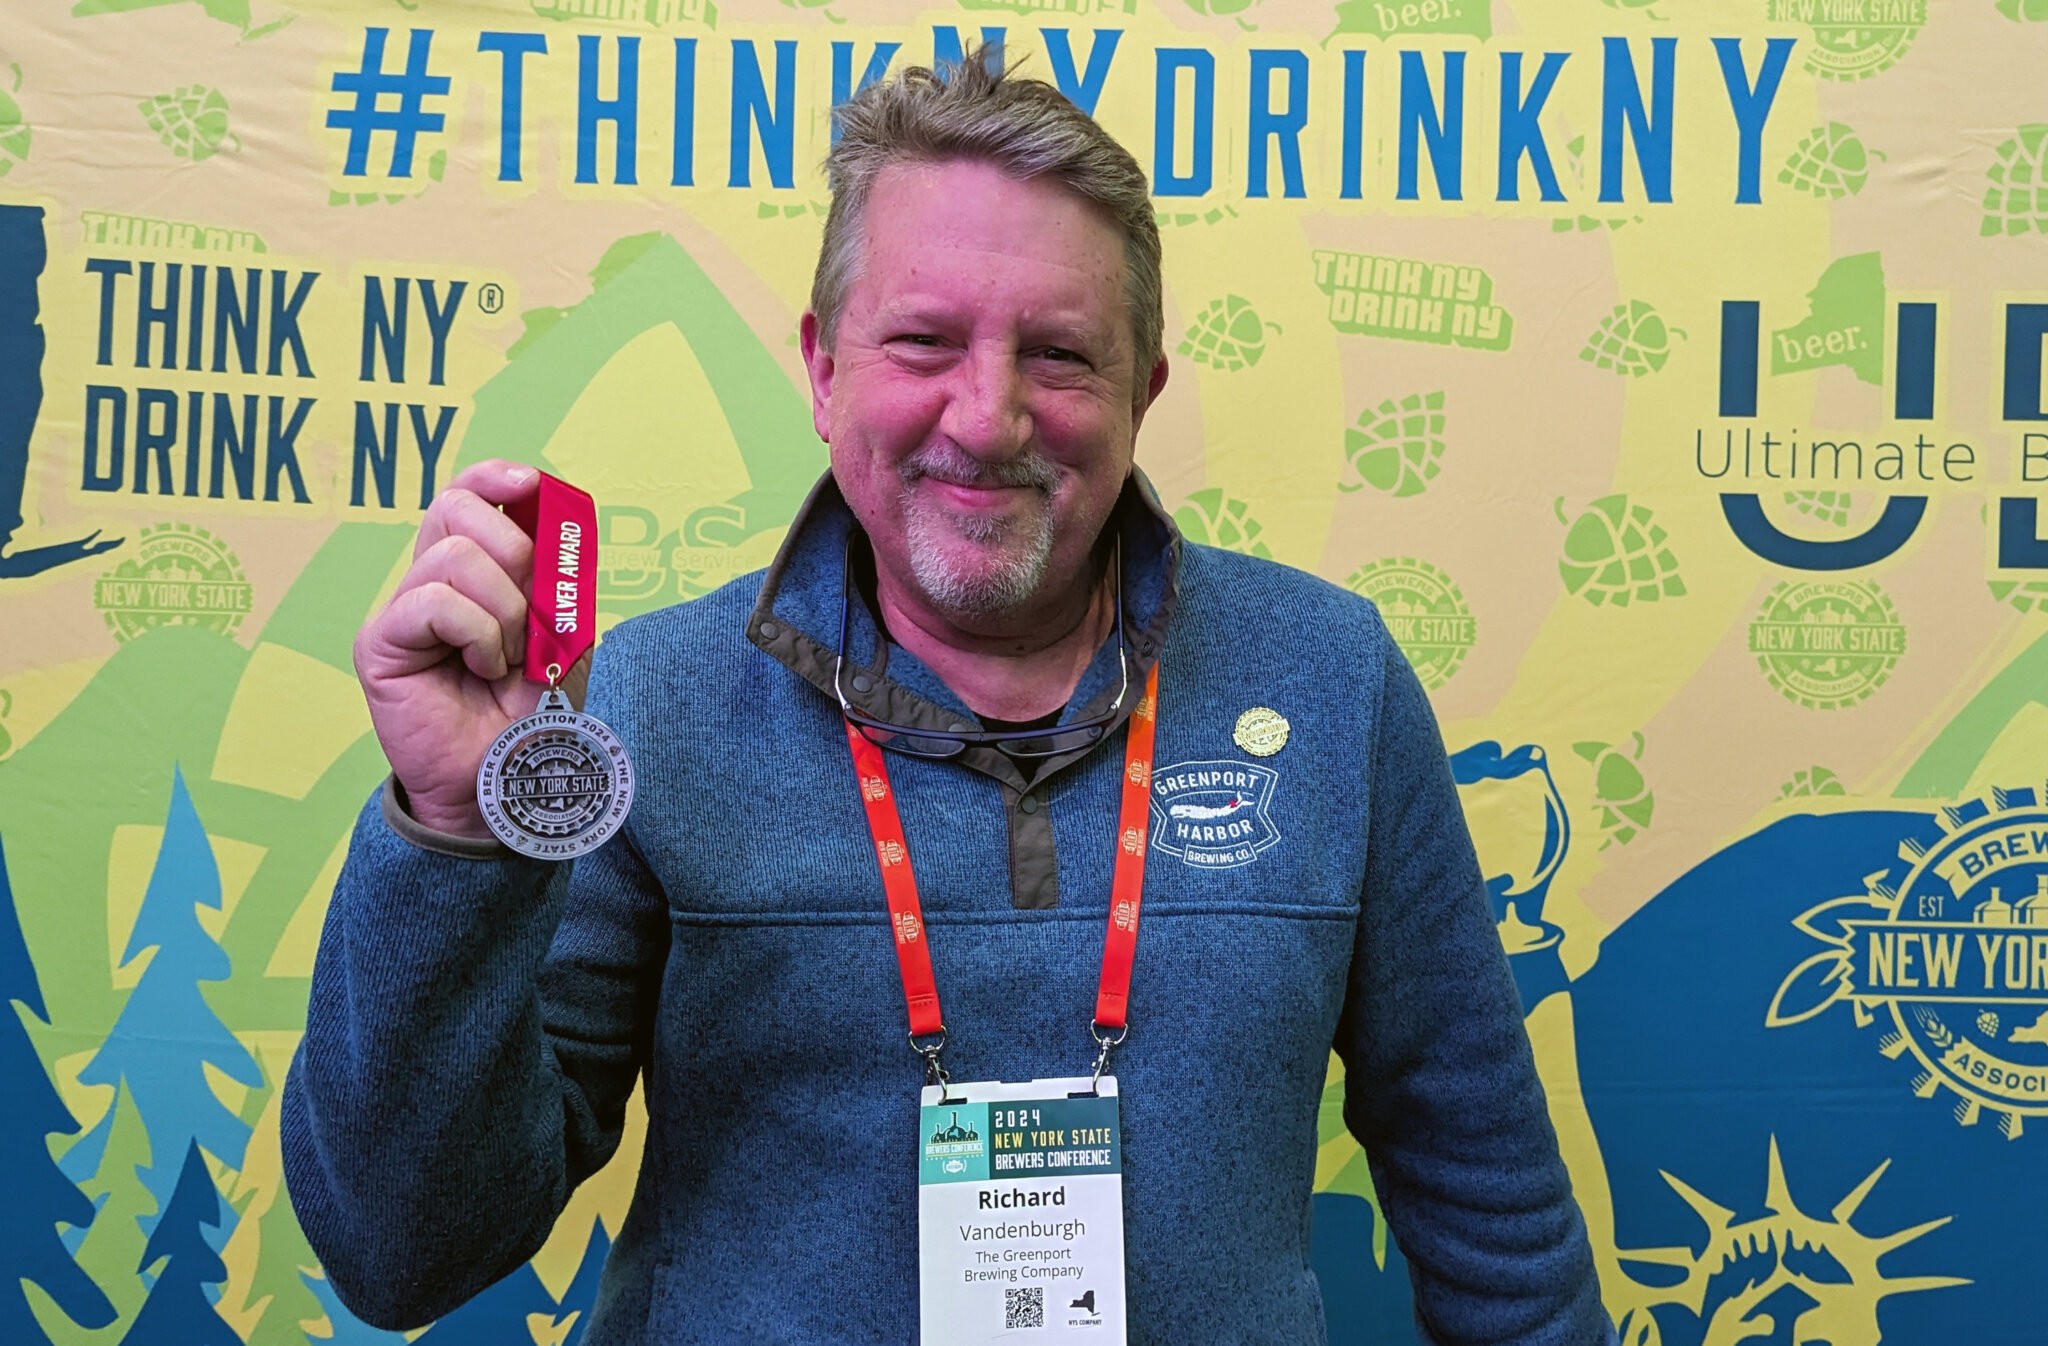 Richard Vandenburgh of Greenport Harbor Brewing Co. shows off their Silver medal at the New York State Craft Beer Competition